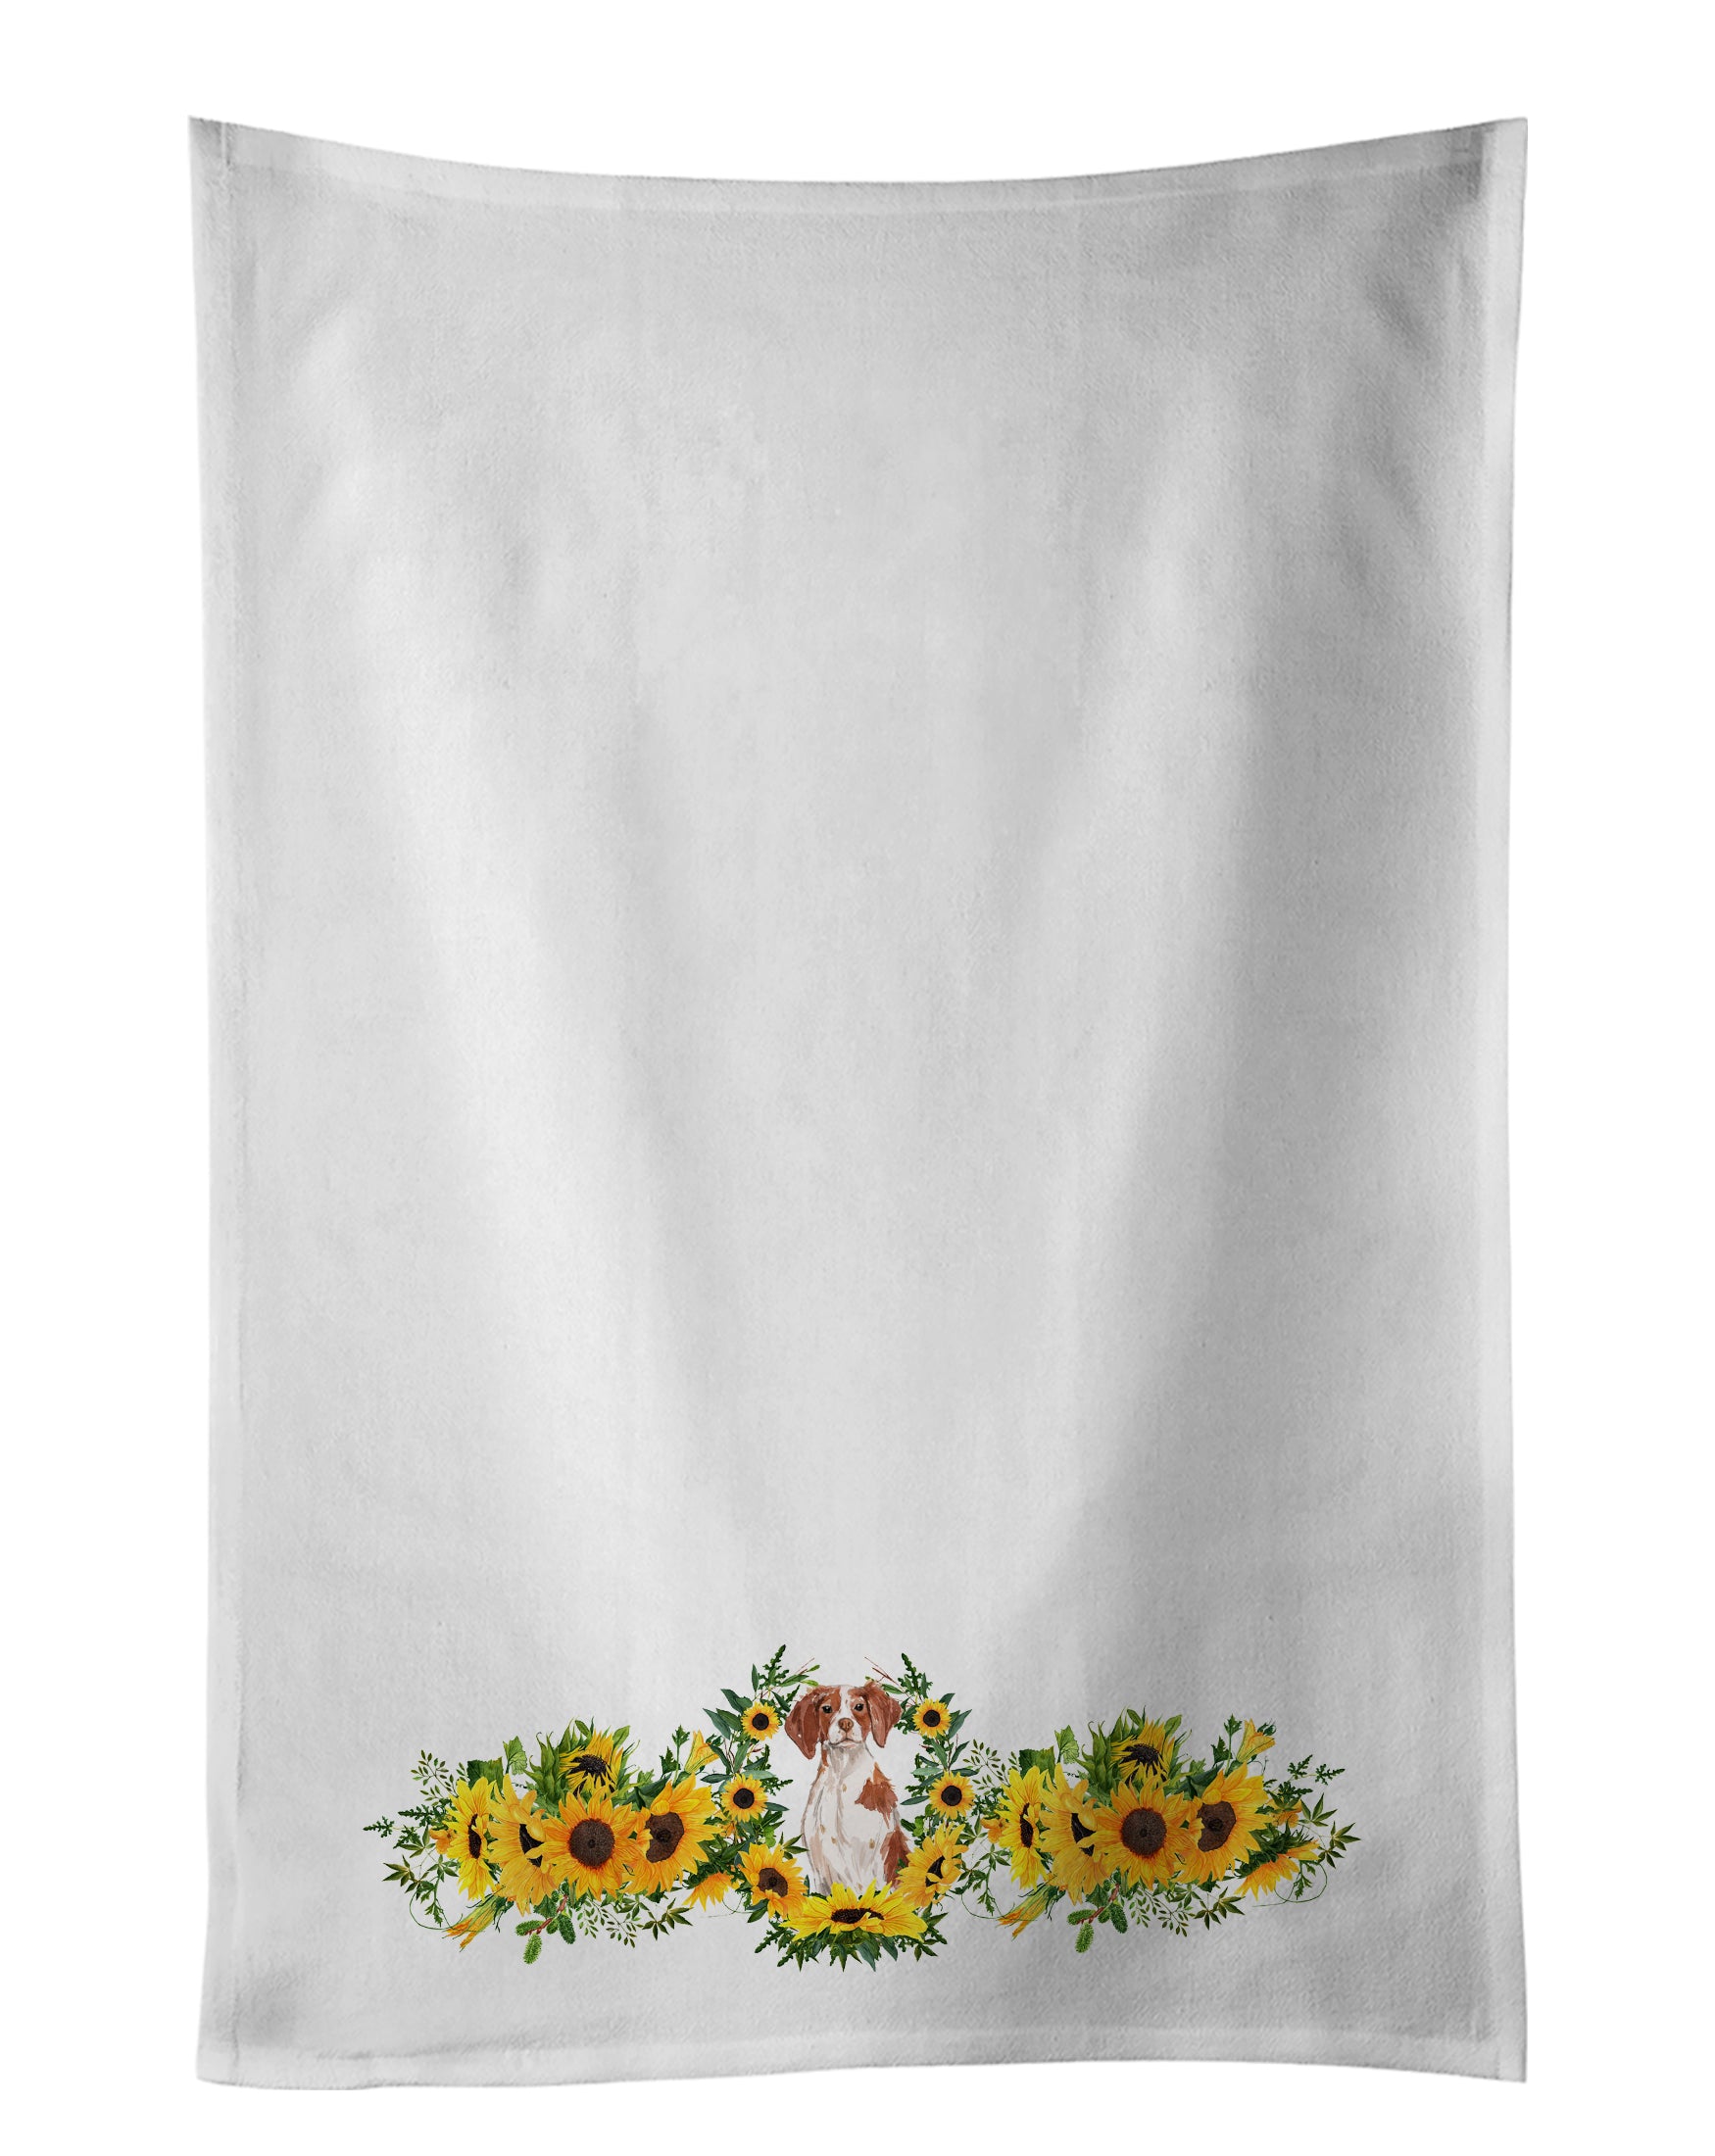 Buy this Brittany Spaniel in Sunflowers White Kitchen Towel Set of 2